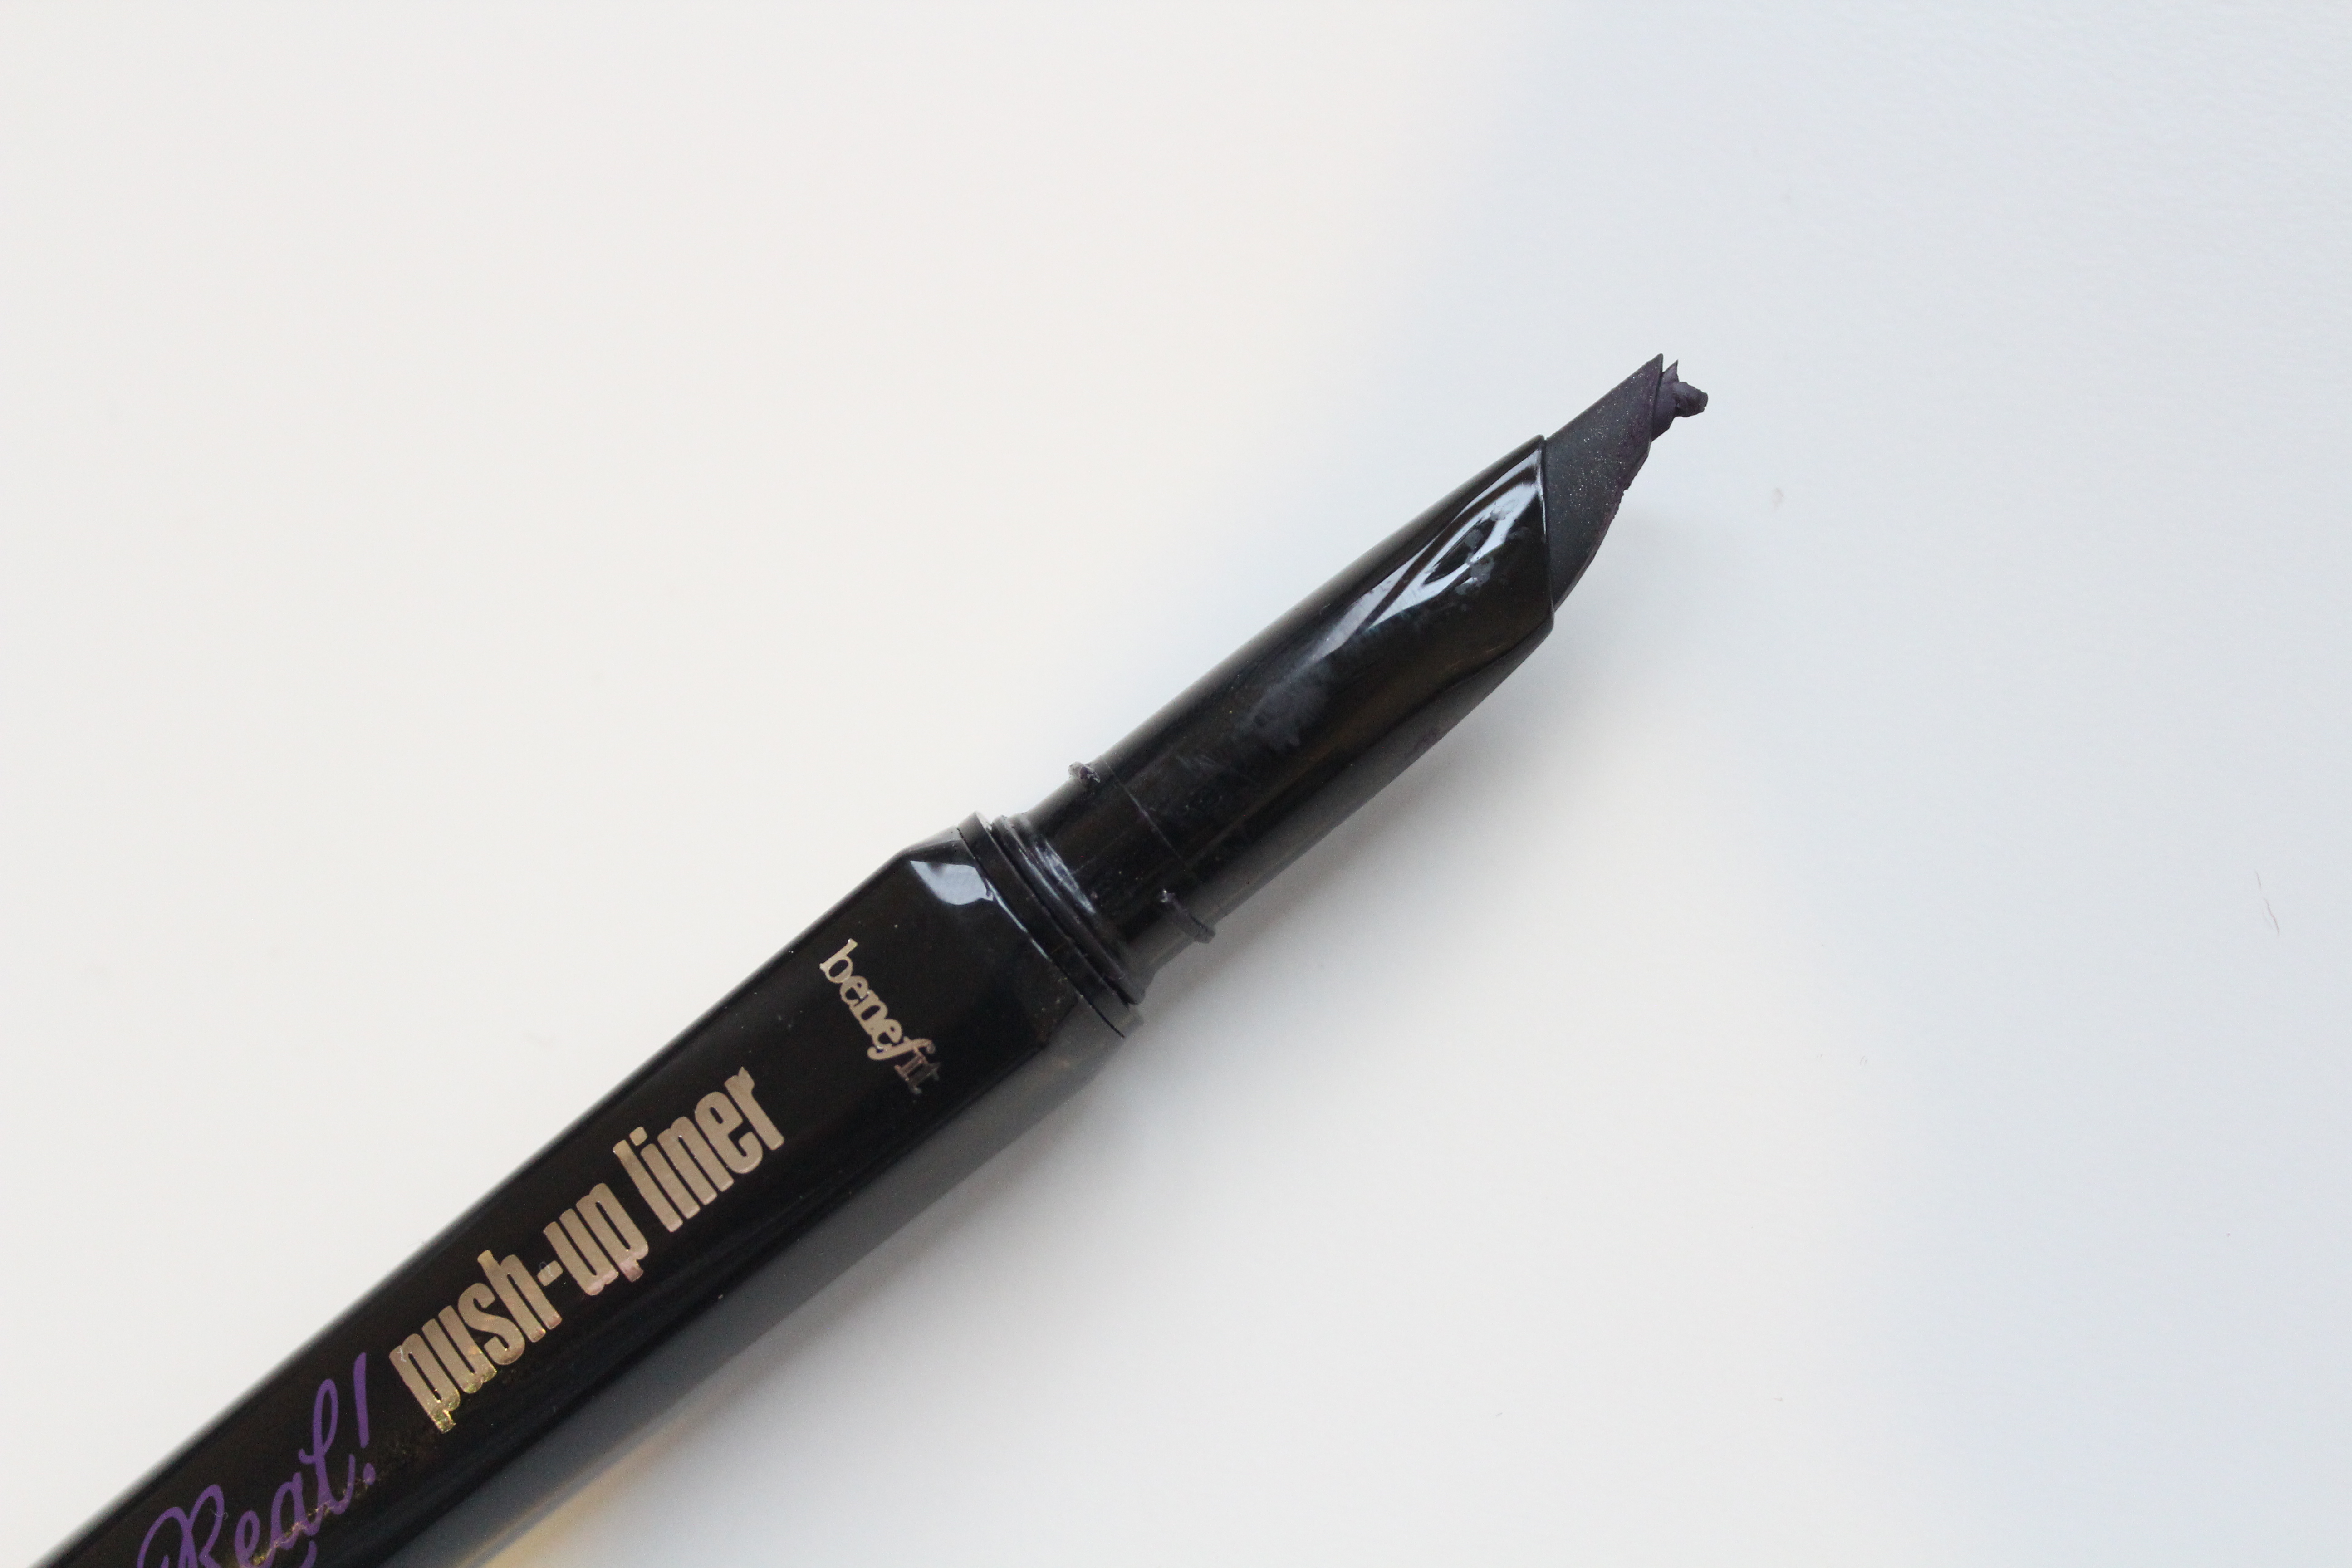 Benefit They're Real Push Up Liner Review by Facemadeup